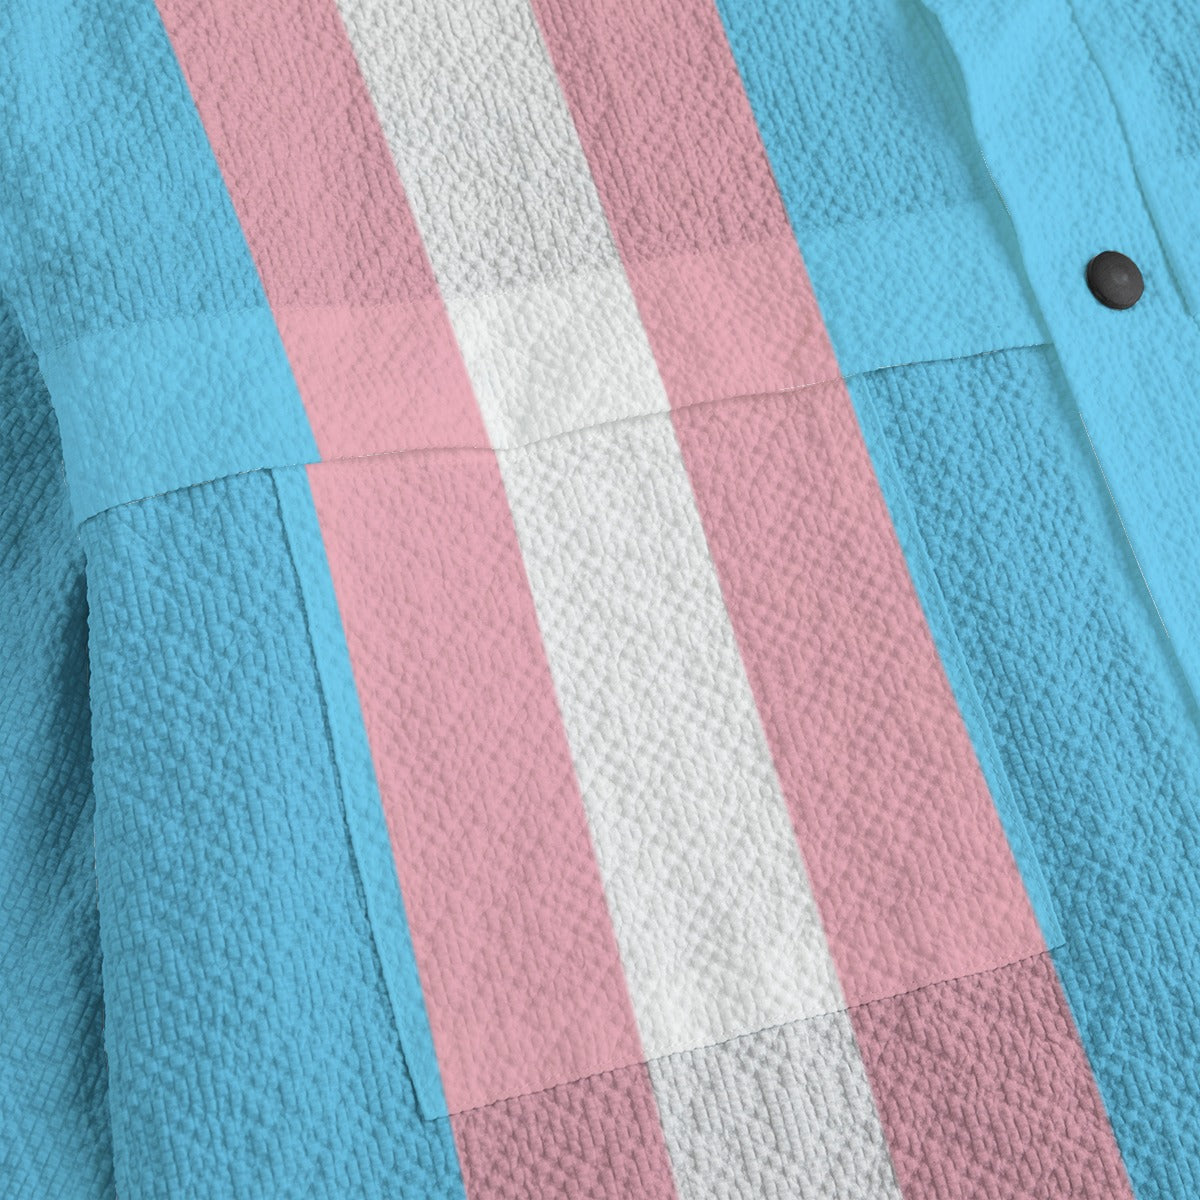 Blue Pink White Pride Casual Jacket